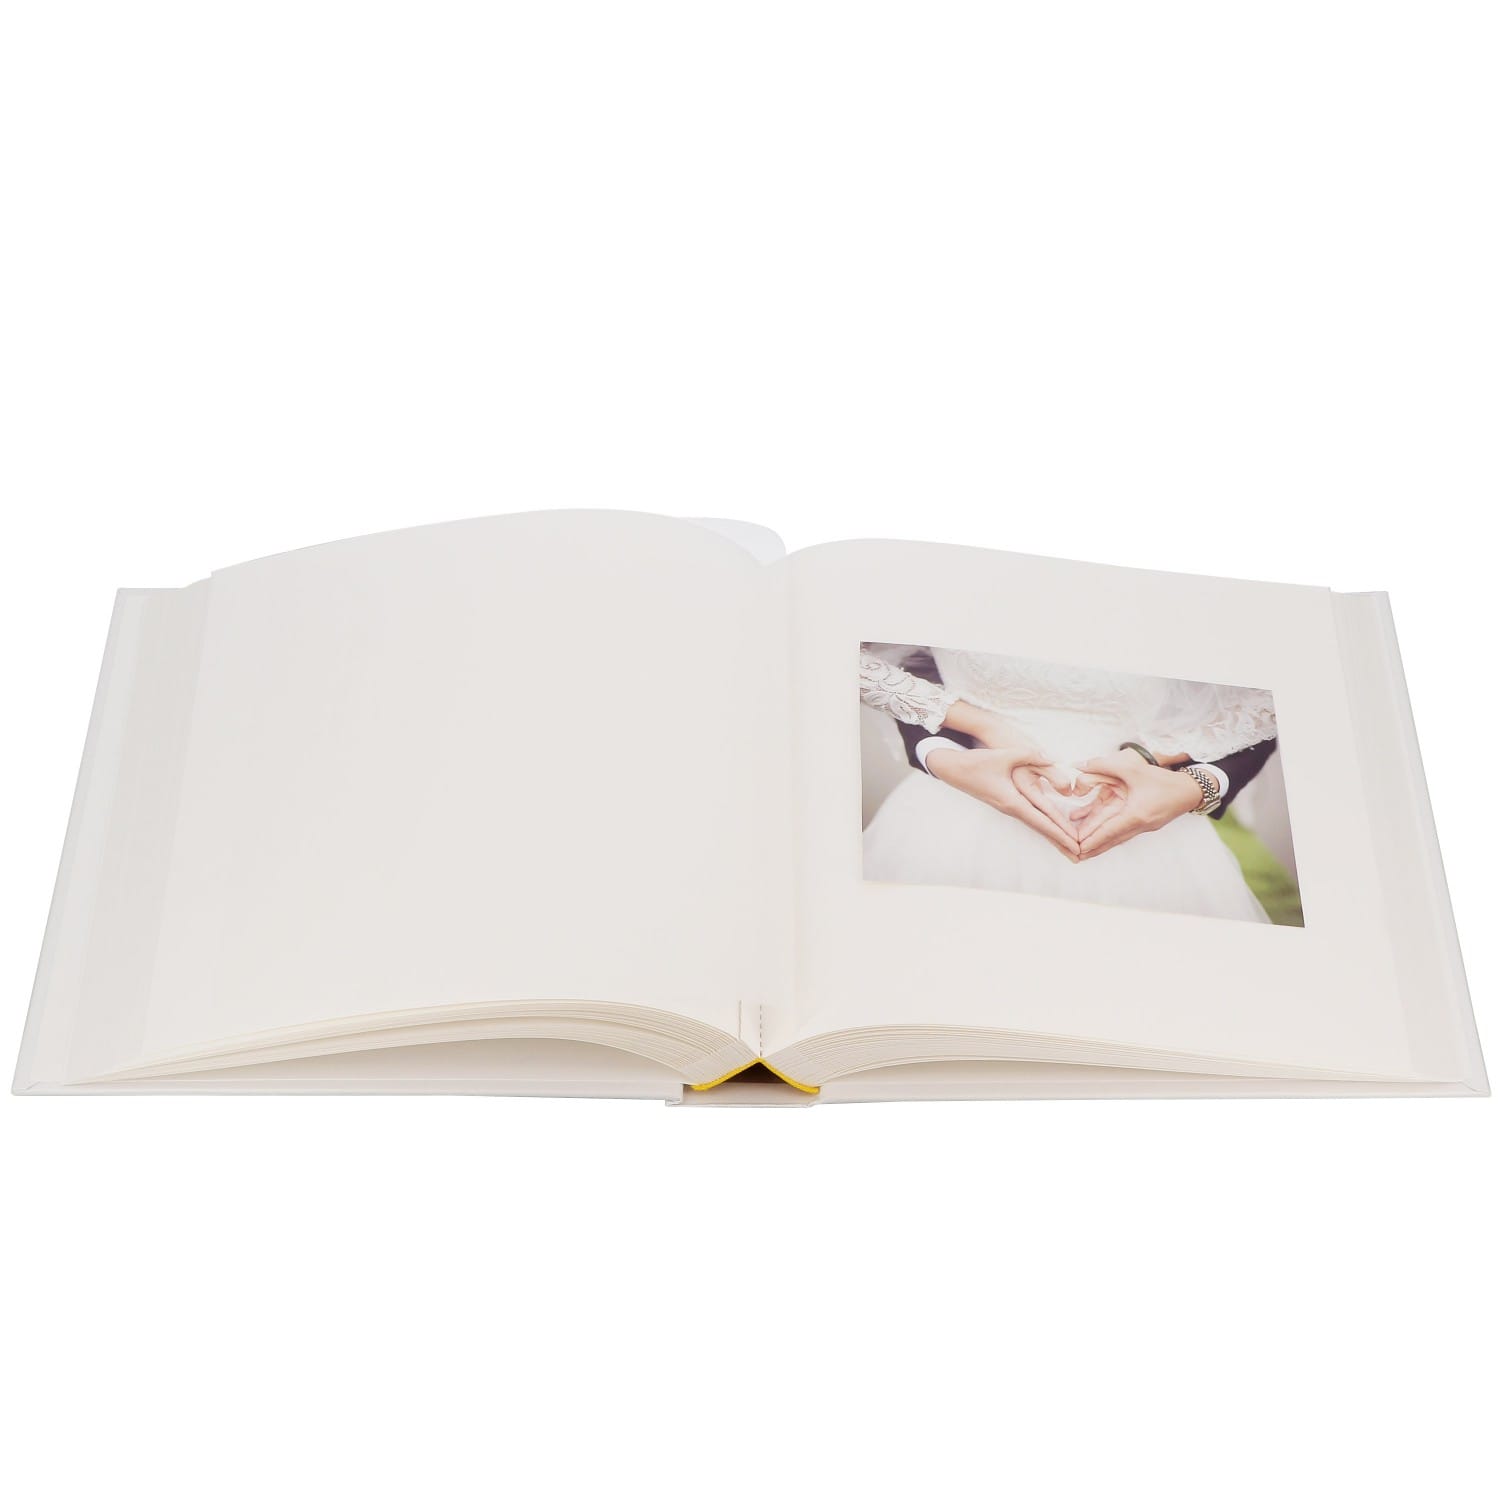 Album photo GOLDBUCH traditionnel Mariage CUORI - 100 pages blanches + feuillets  cristal - 400 photos - Couverture Blanche 30x31cm